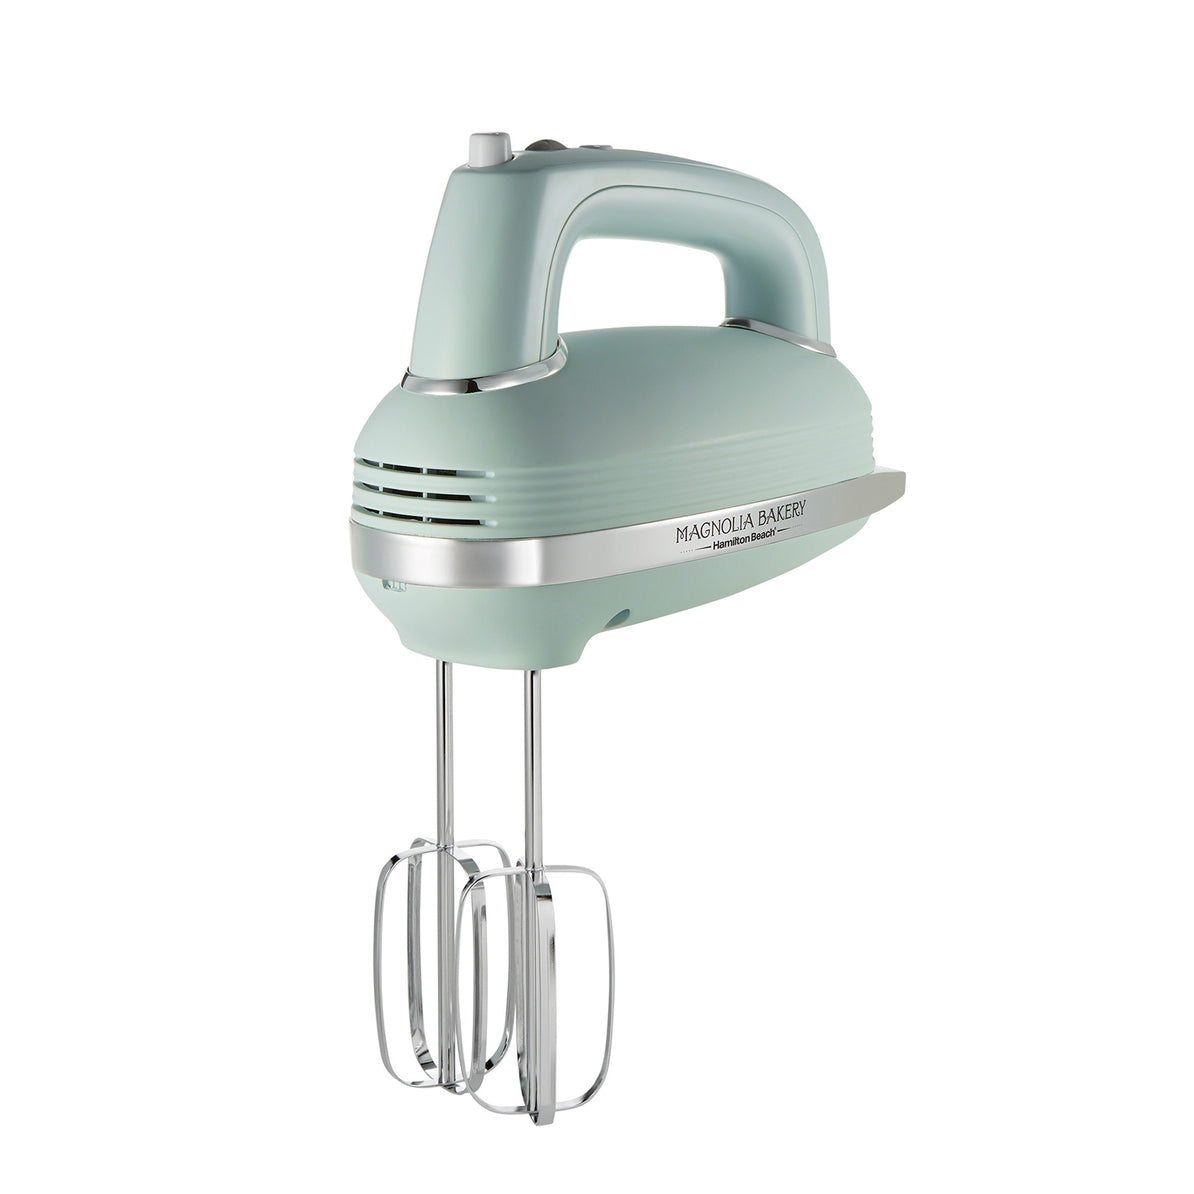 Hamilton Beach 6 Speed Performance Hand Mixer with Case and